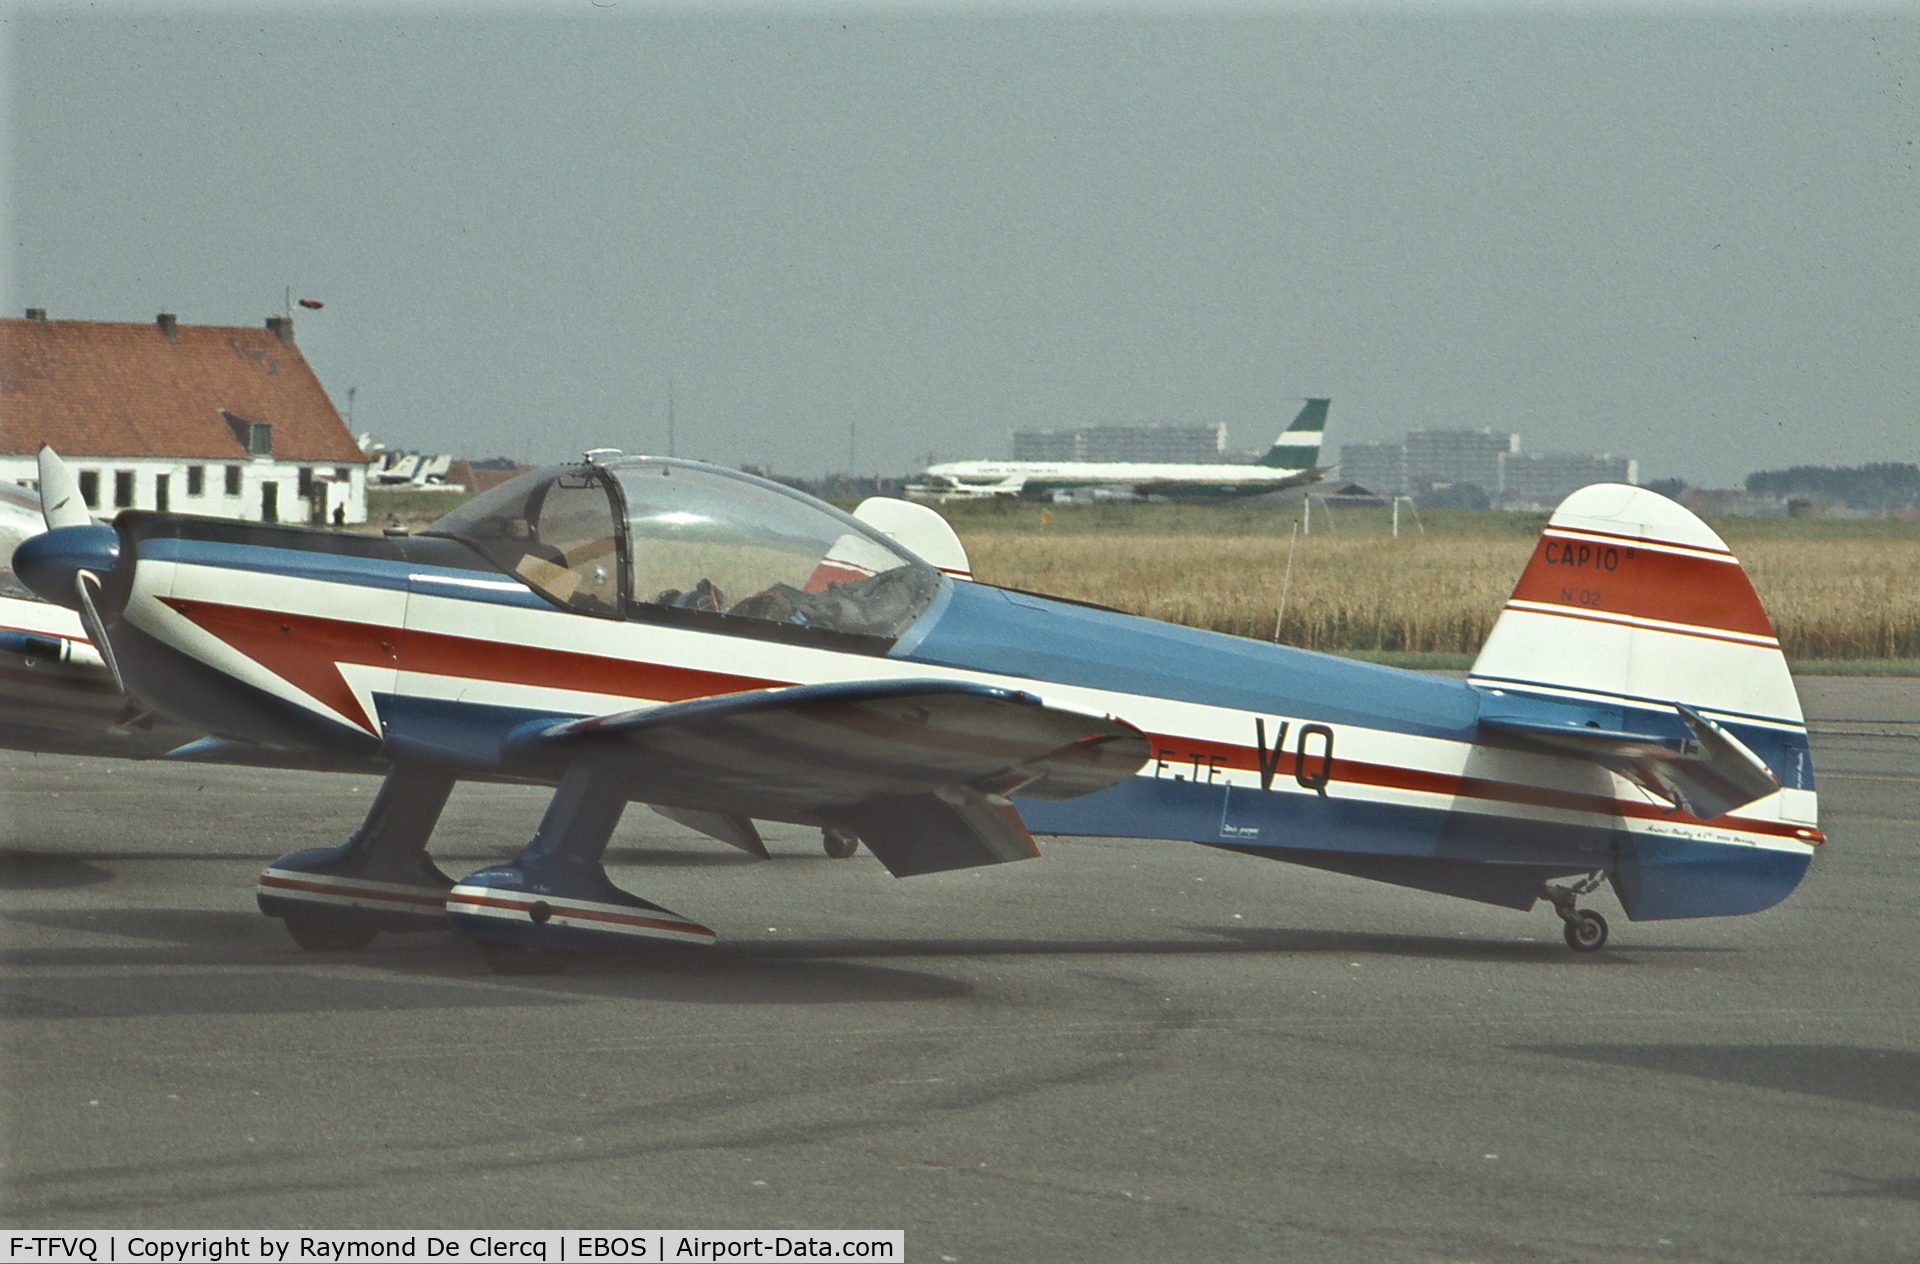 F-TFVQ, 1969 Mudry CAP-10B C/N 02, Ostend airport in mid-seventies.
Later became F-GNVA and PH-RIC.